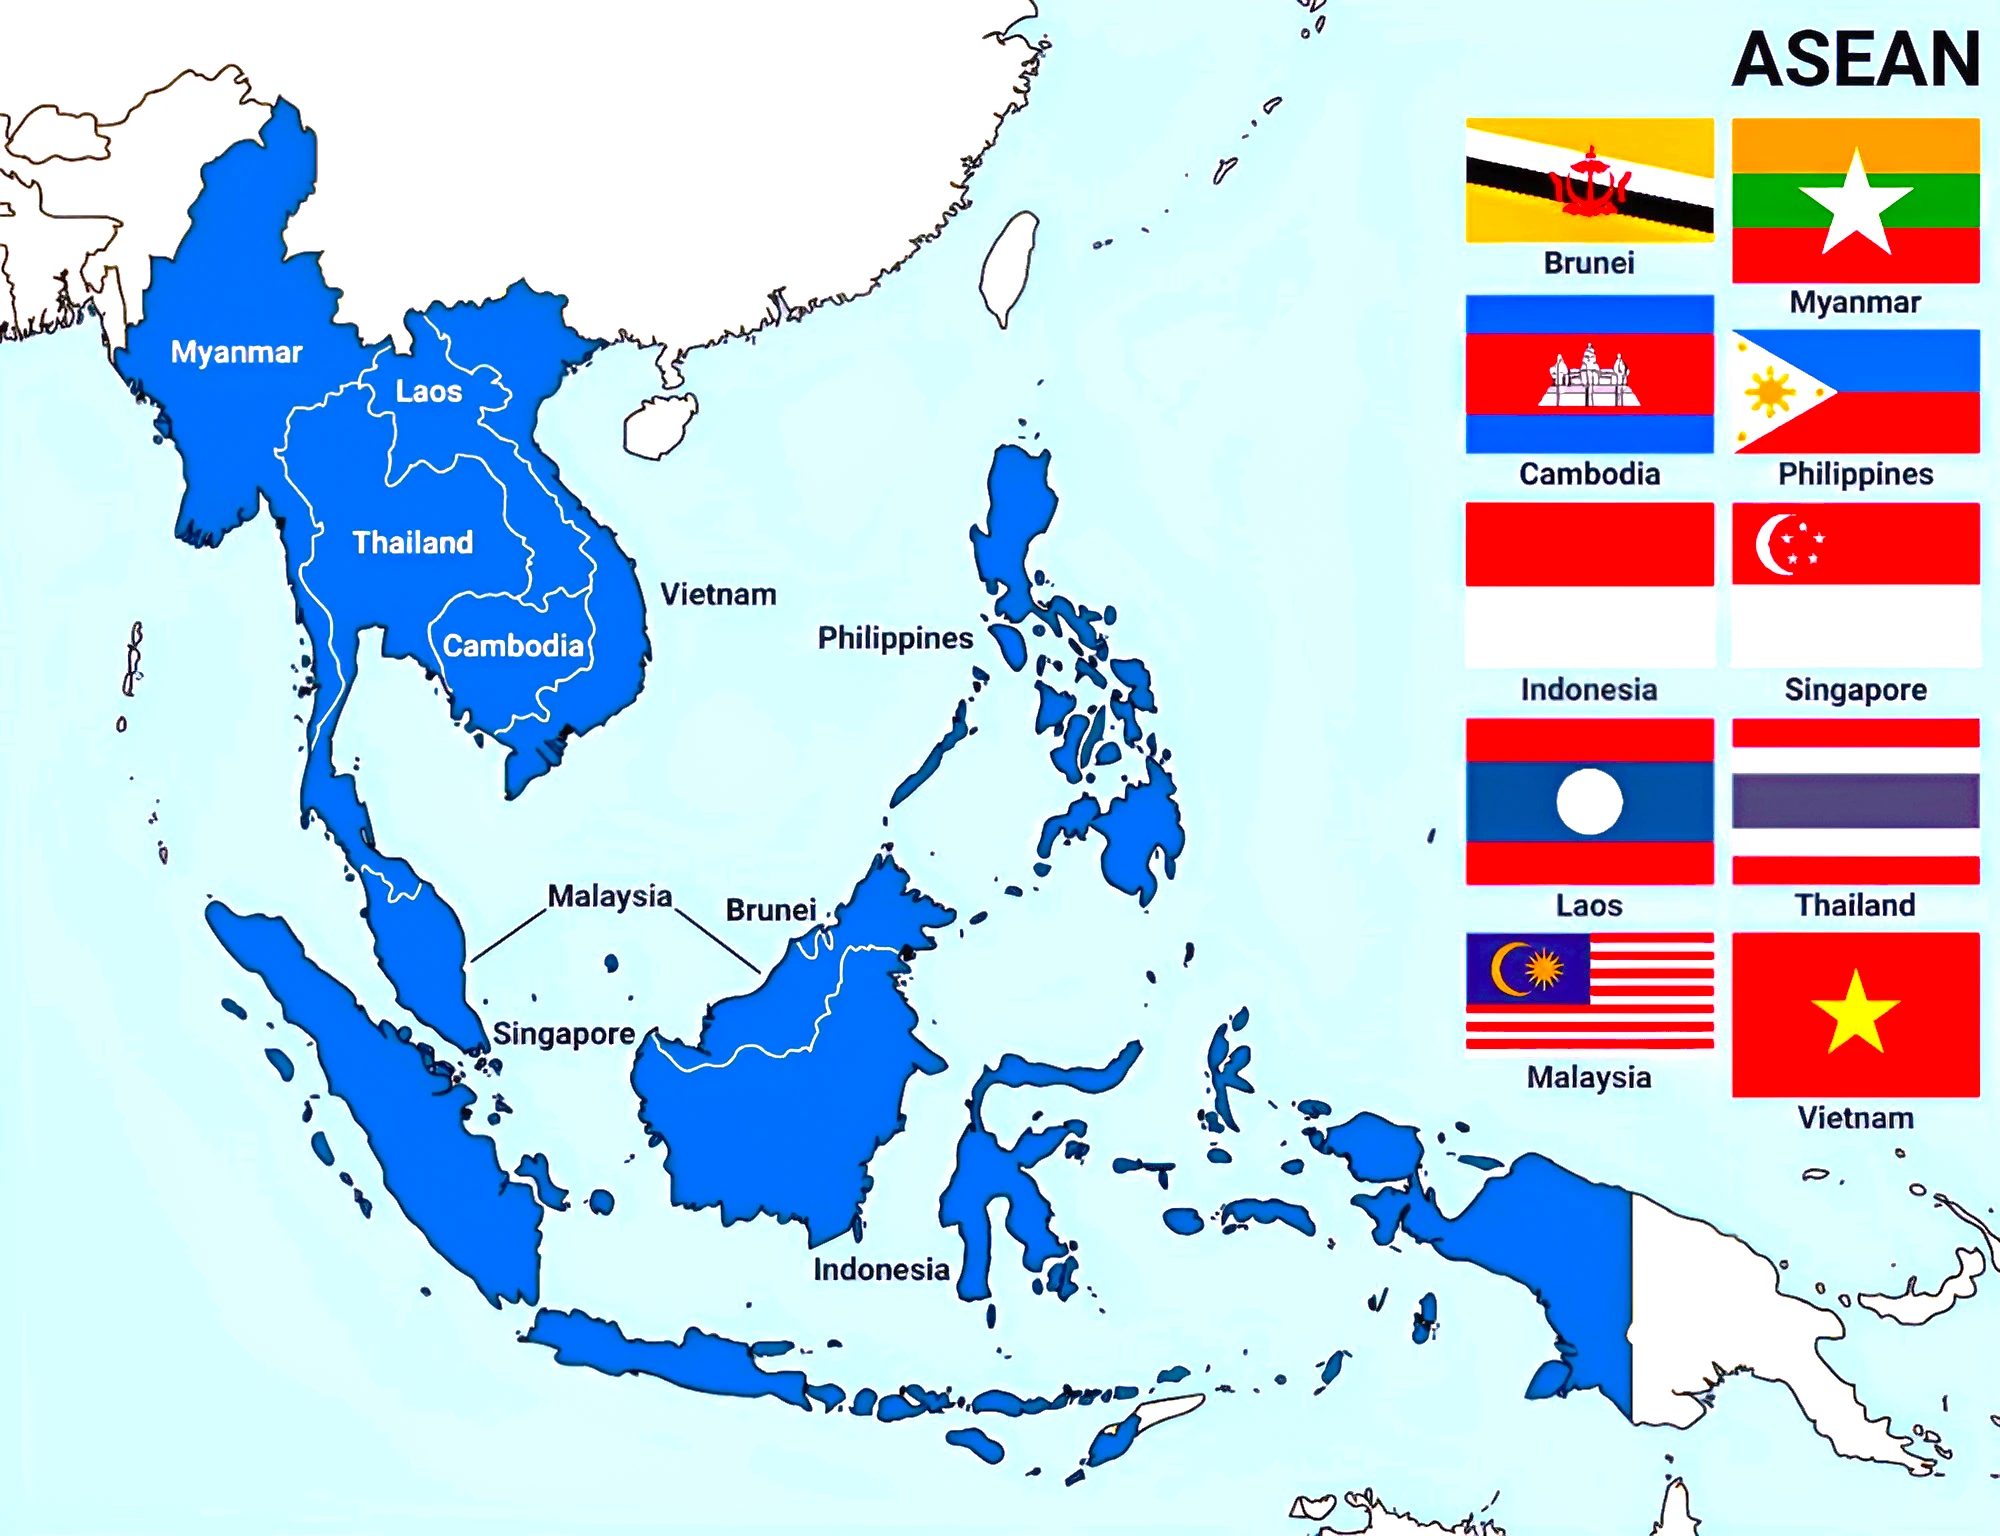 India and ASEAN
